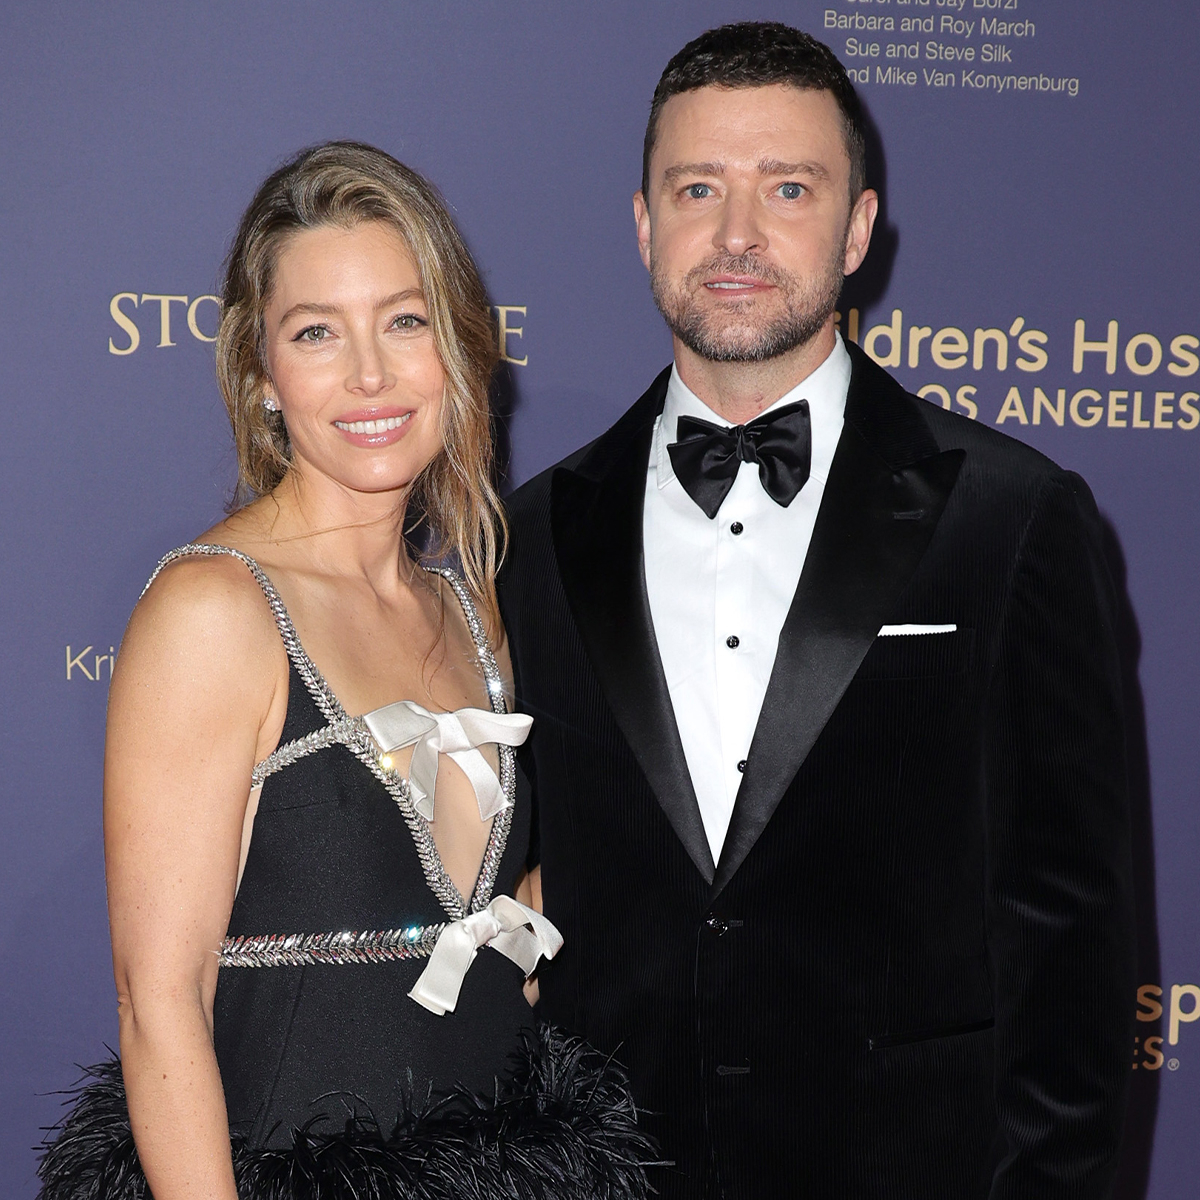 Proof Jessica Biel’s Old Pics Are Tearin’ Up Justin Timberlake’s Heart